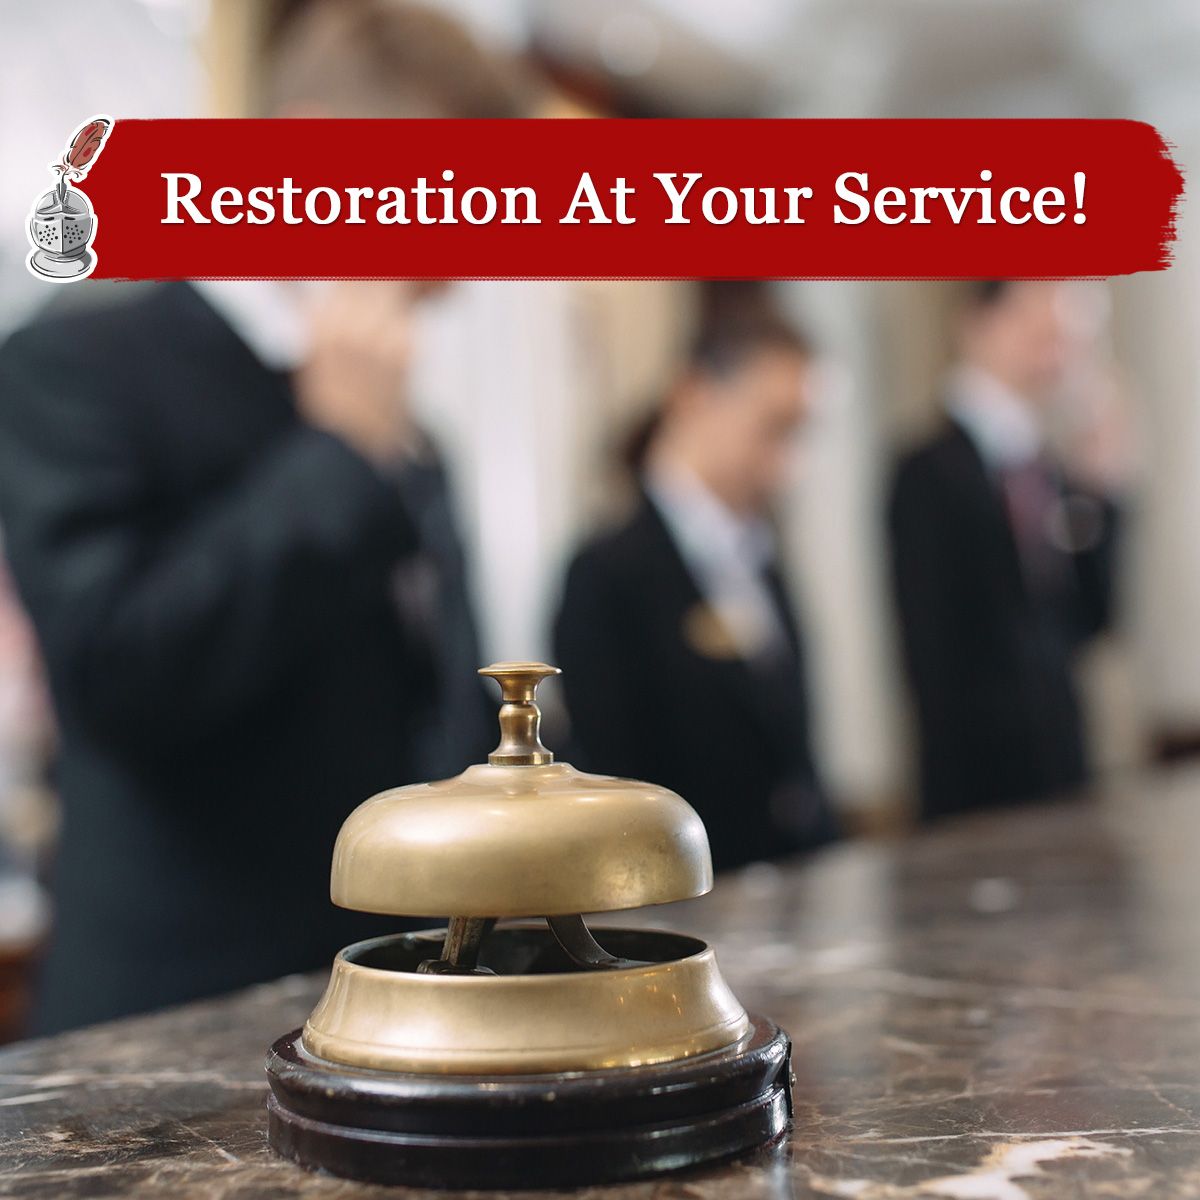 Restoration At Your Service!